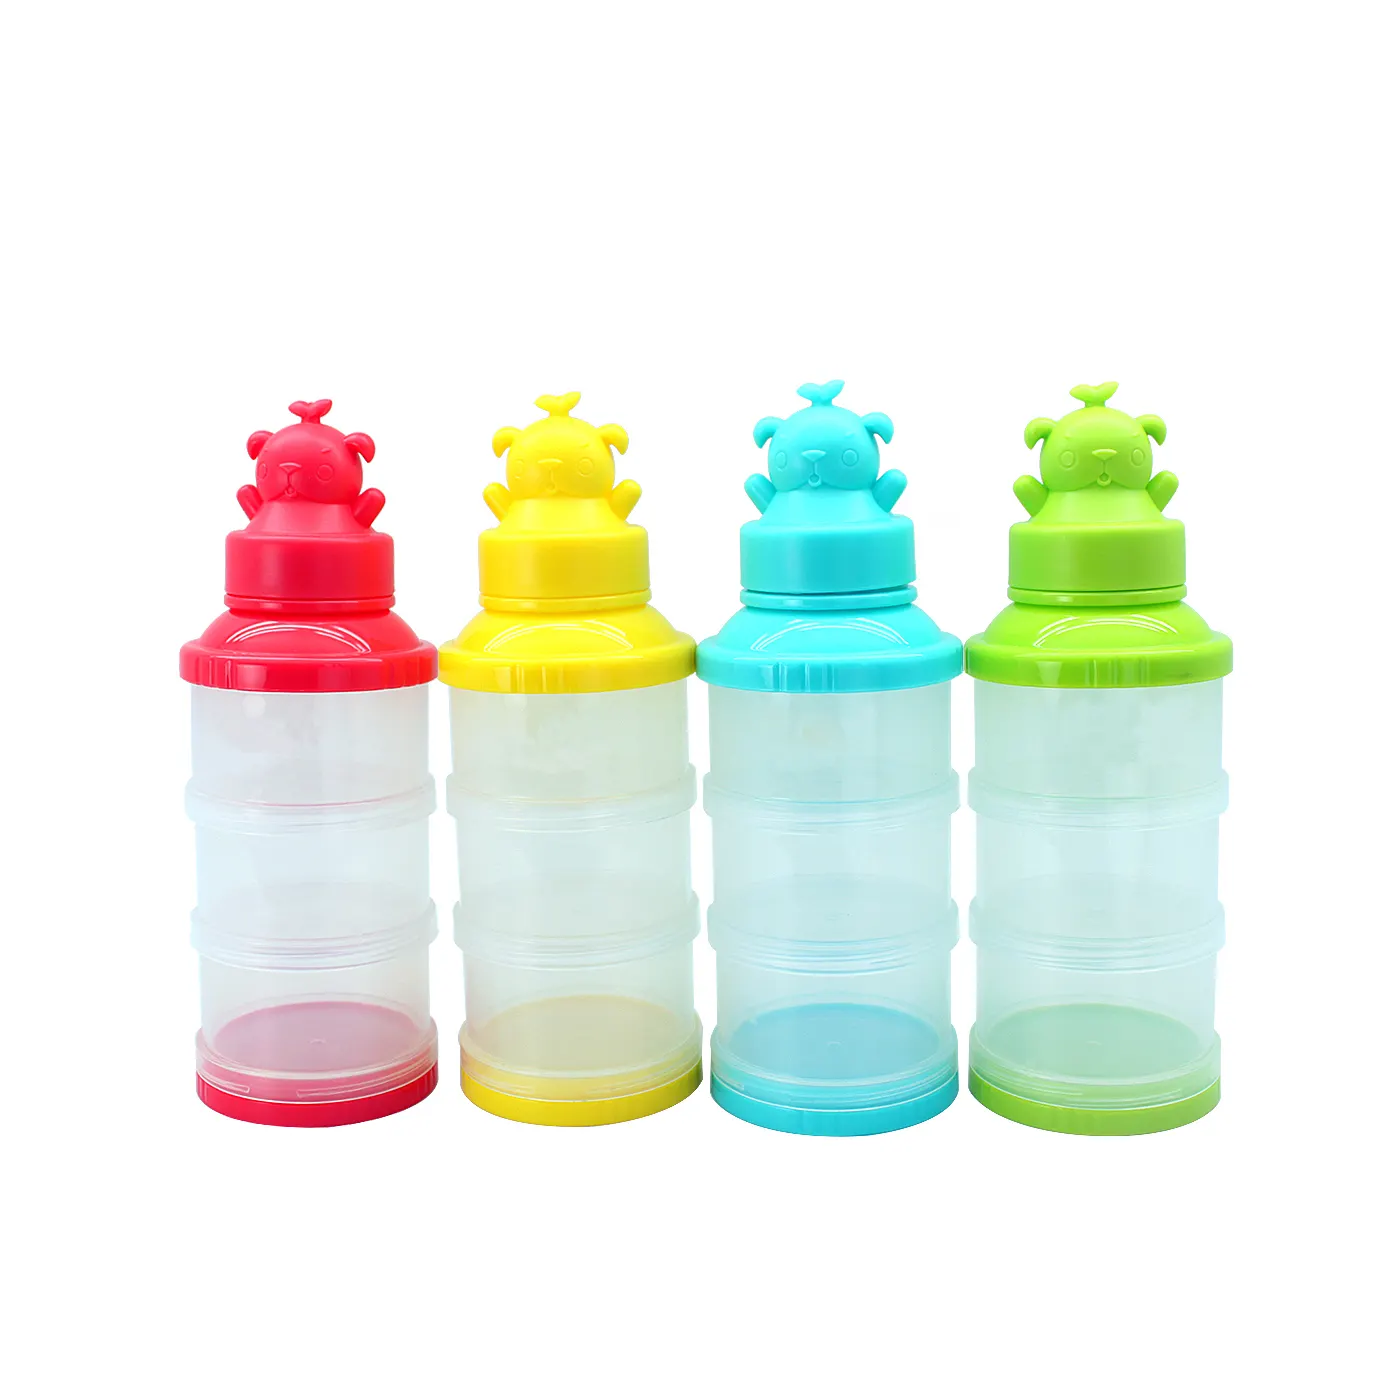 3 Layers BAF Free Stackable And Portable Milk Powder Formula Storage Container For Travel